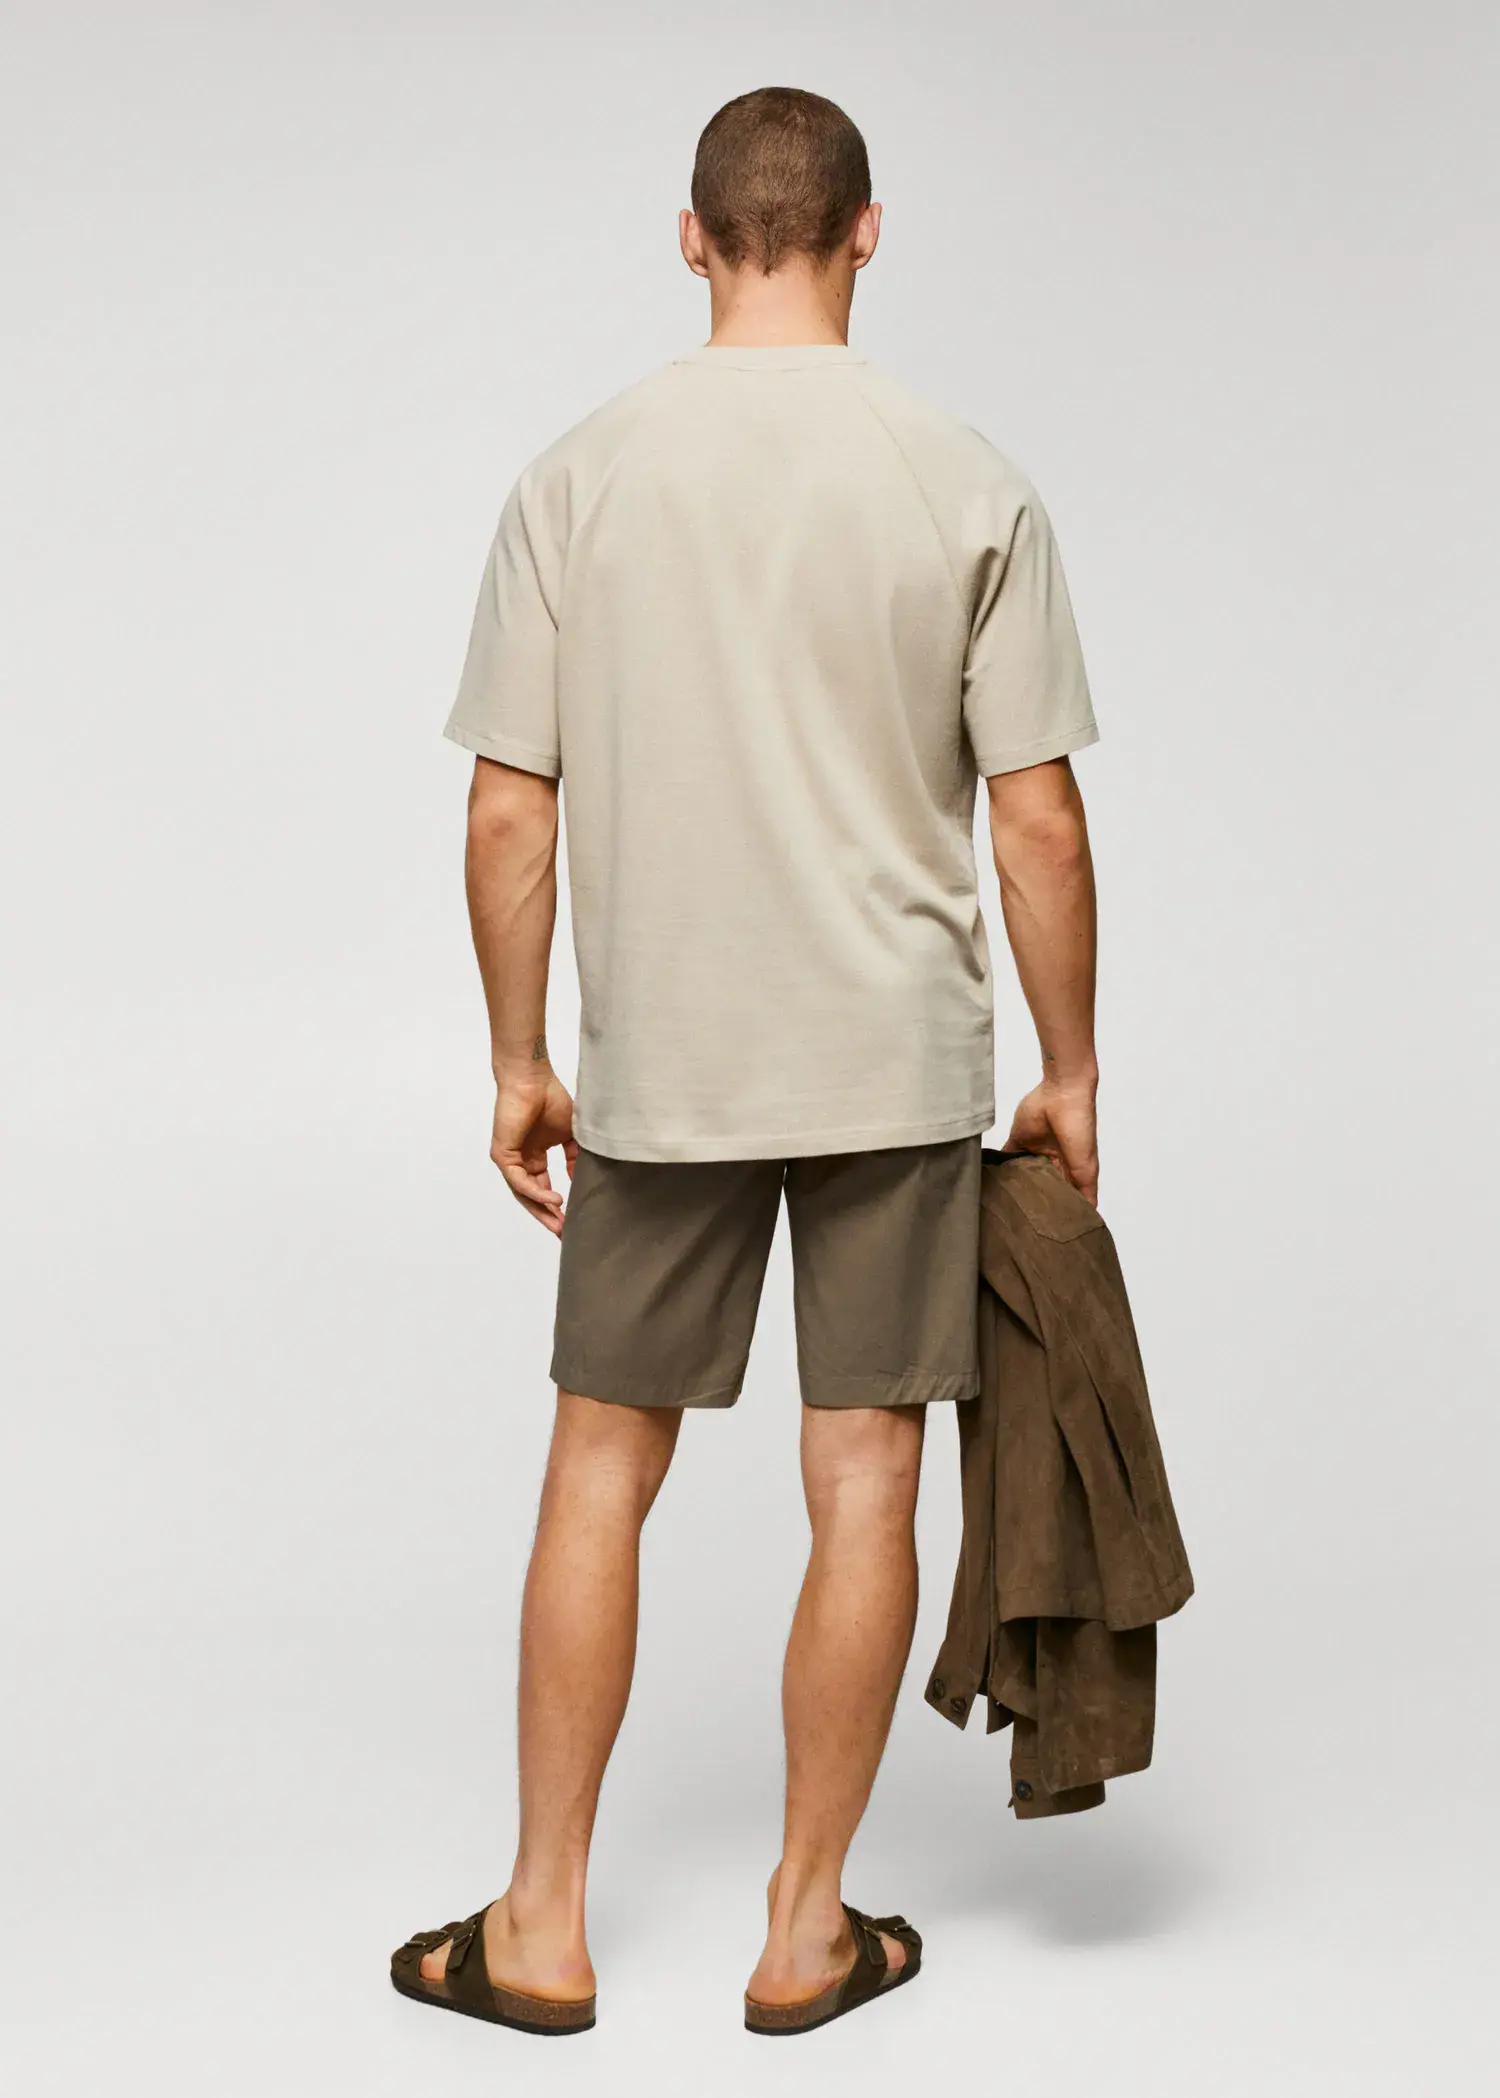 Mango Textured cotton-linen t-shirt. a man in shorts and a t-shirt is holding a jacket. 